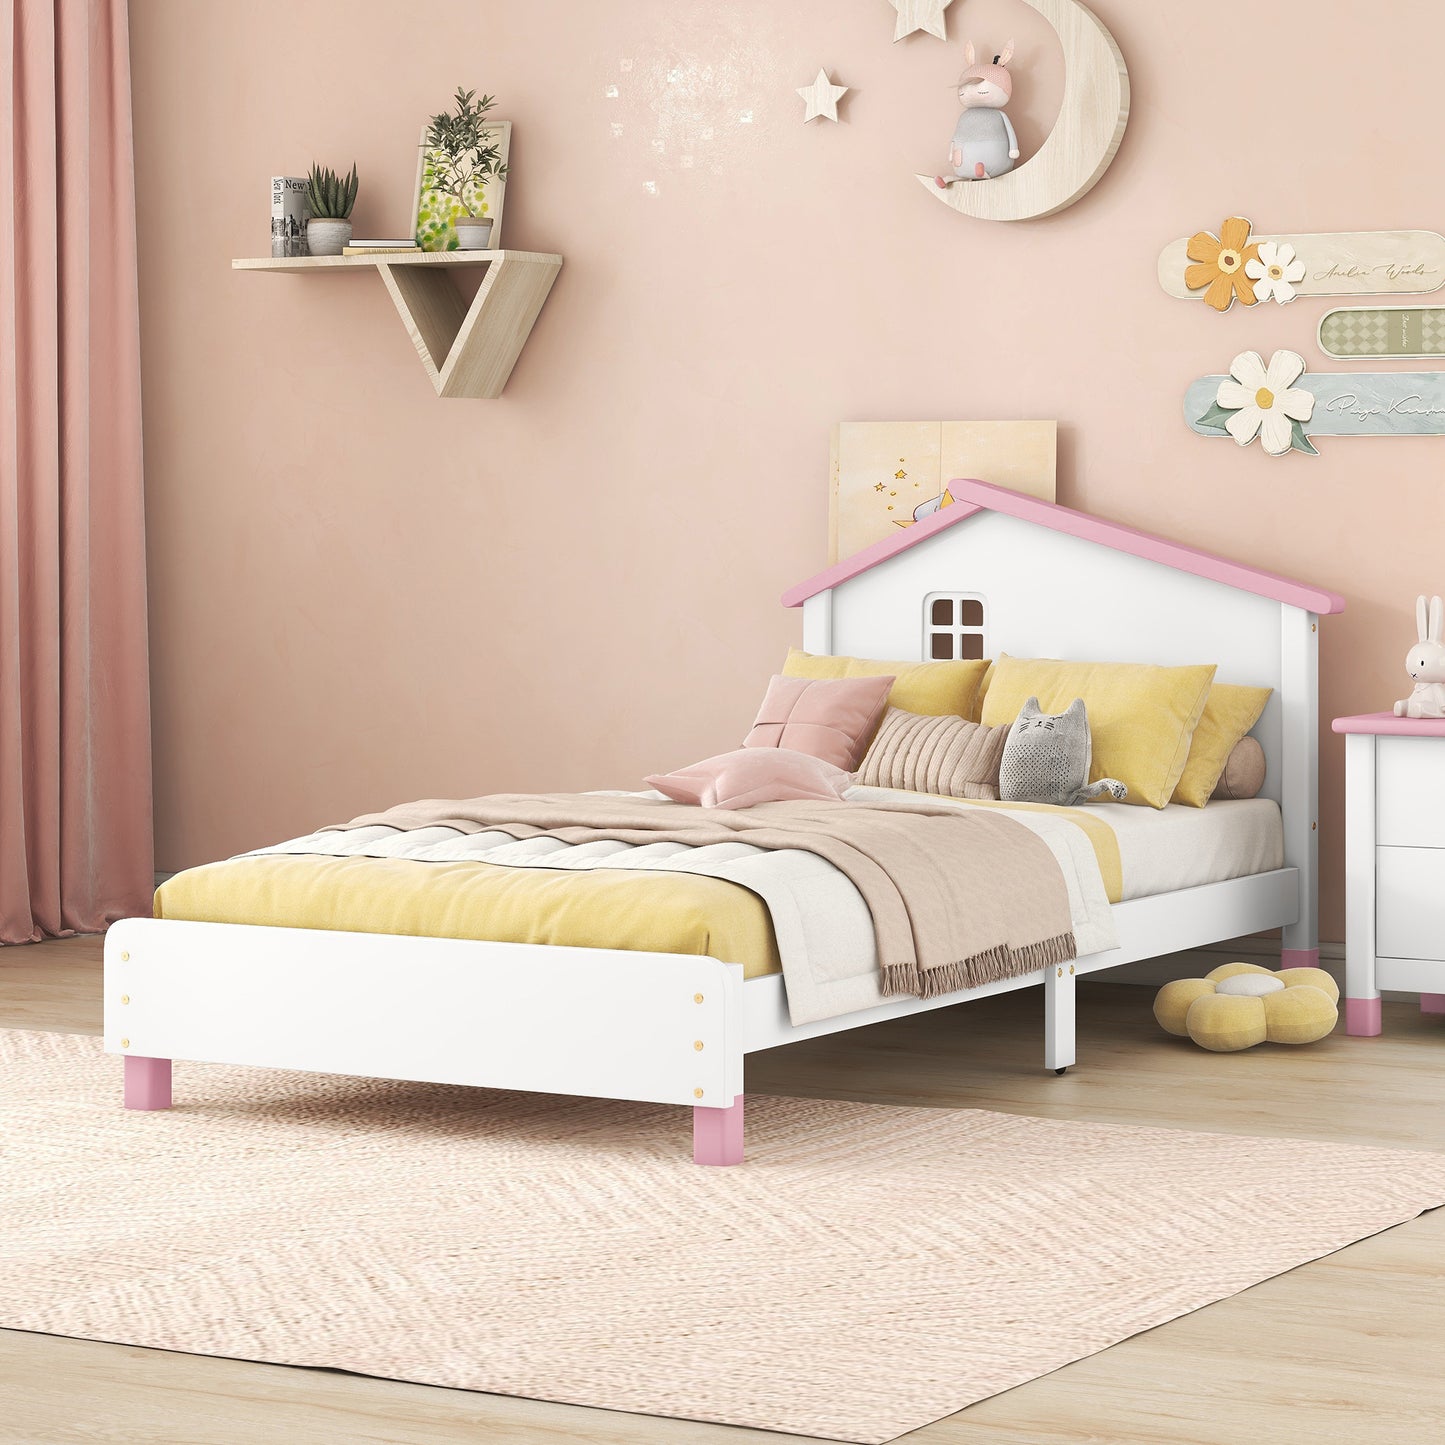 Twin Size Wood Platform Bed with House-shaped Headboard  (White+Pink)